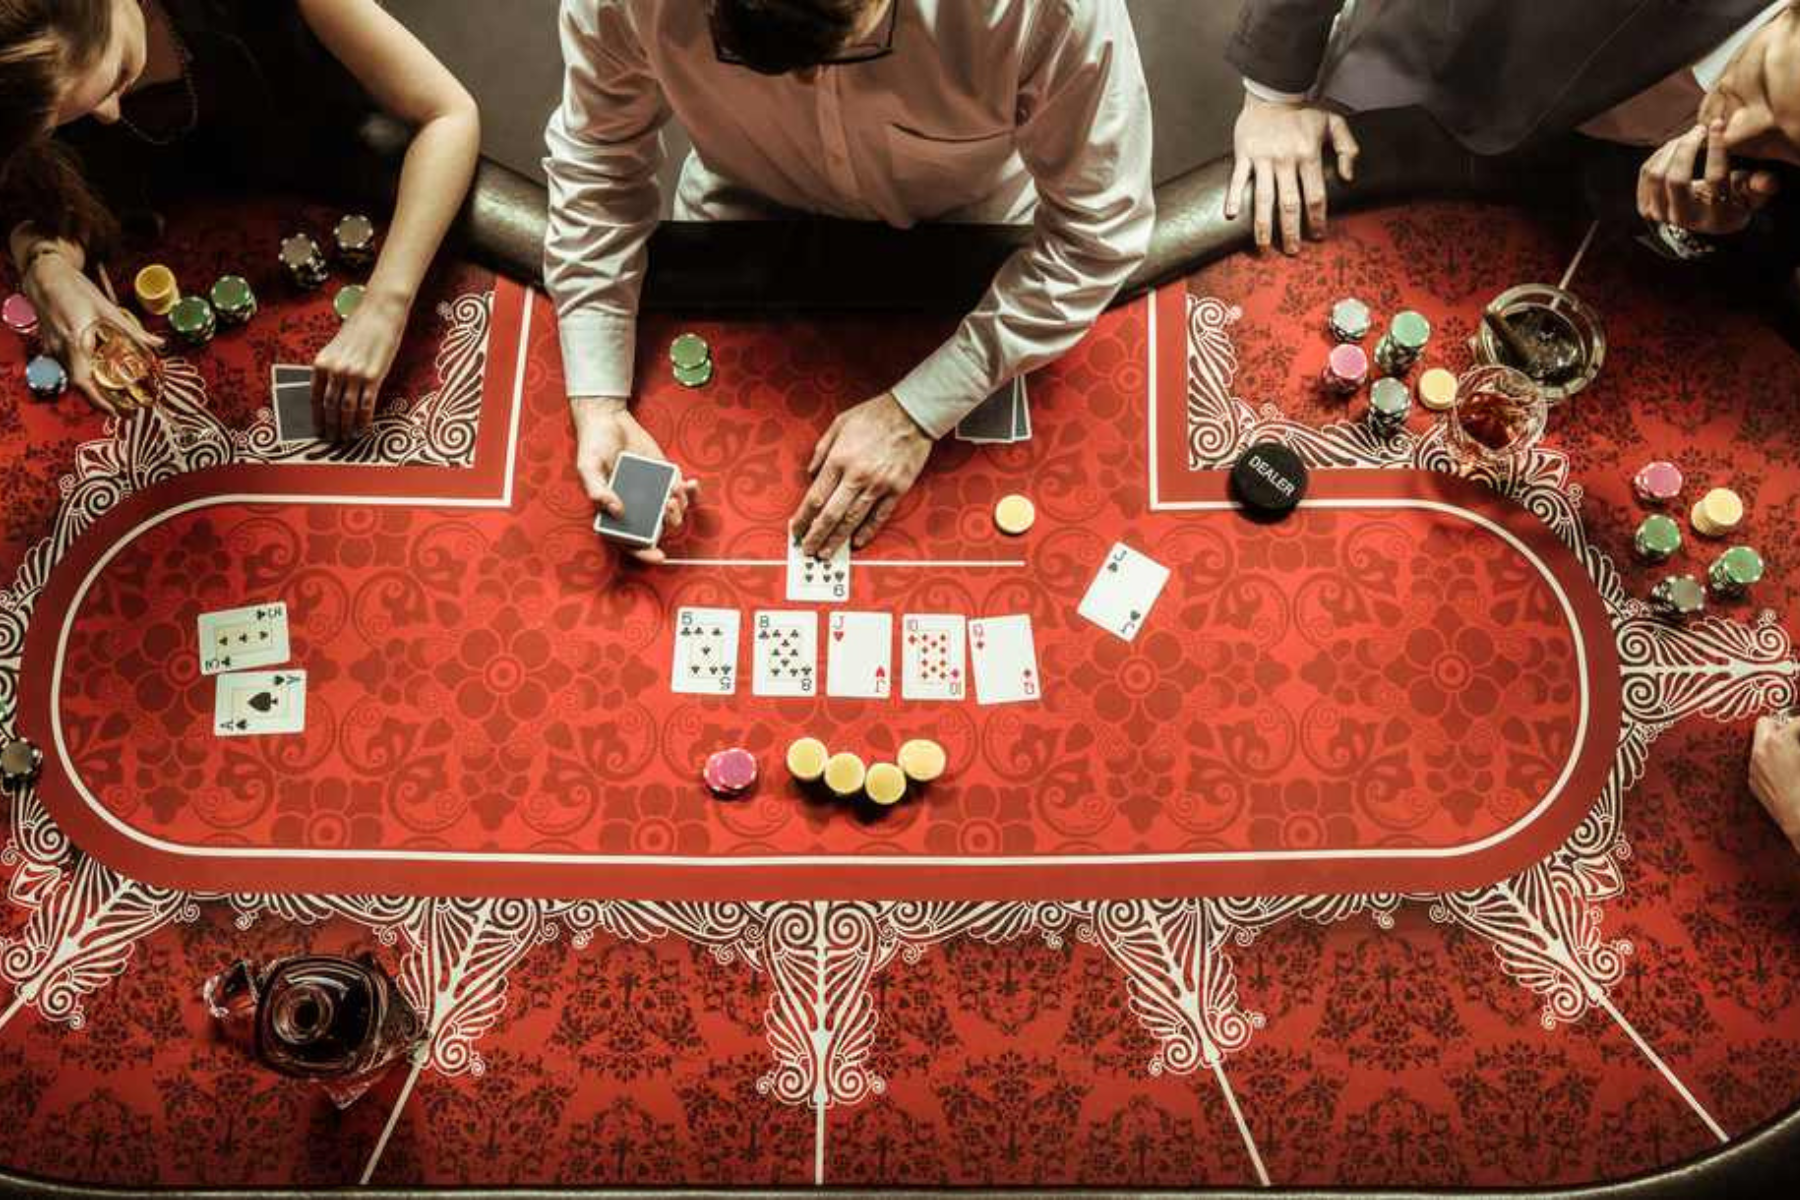 How to Choose the Best Poker Table for Your Budget